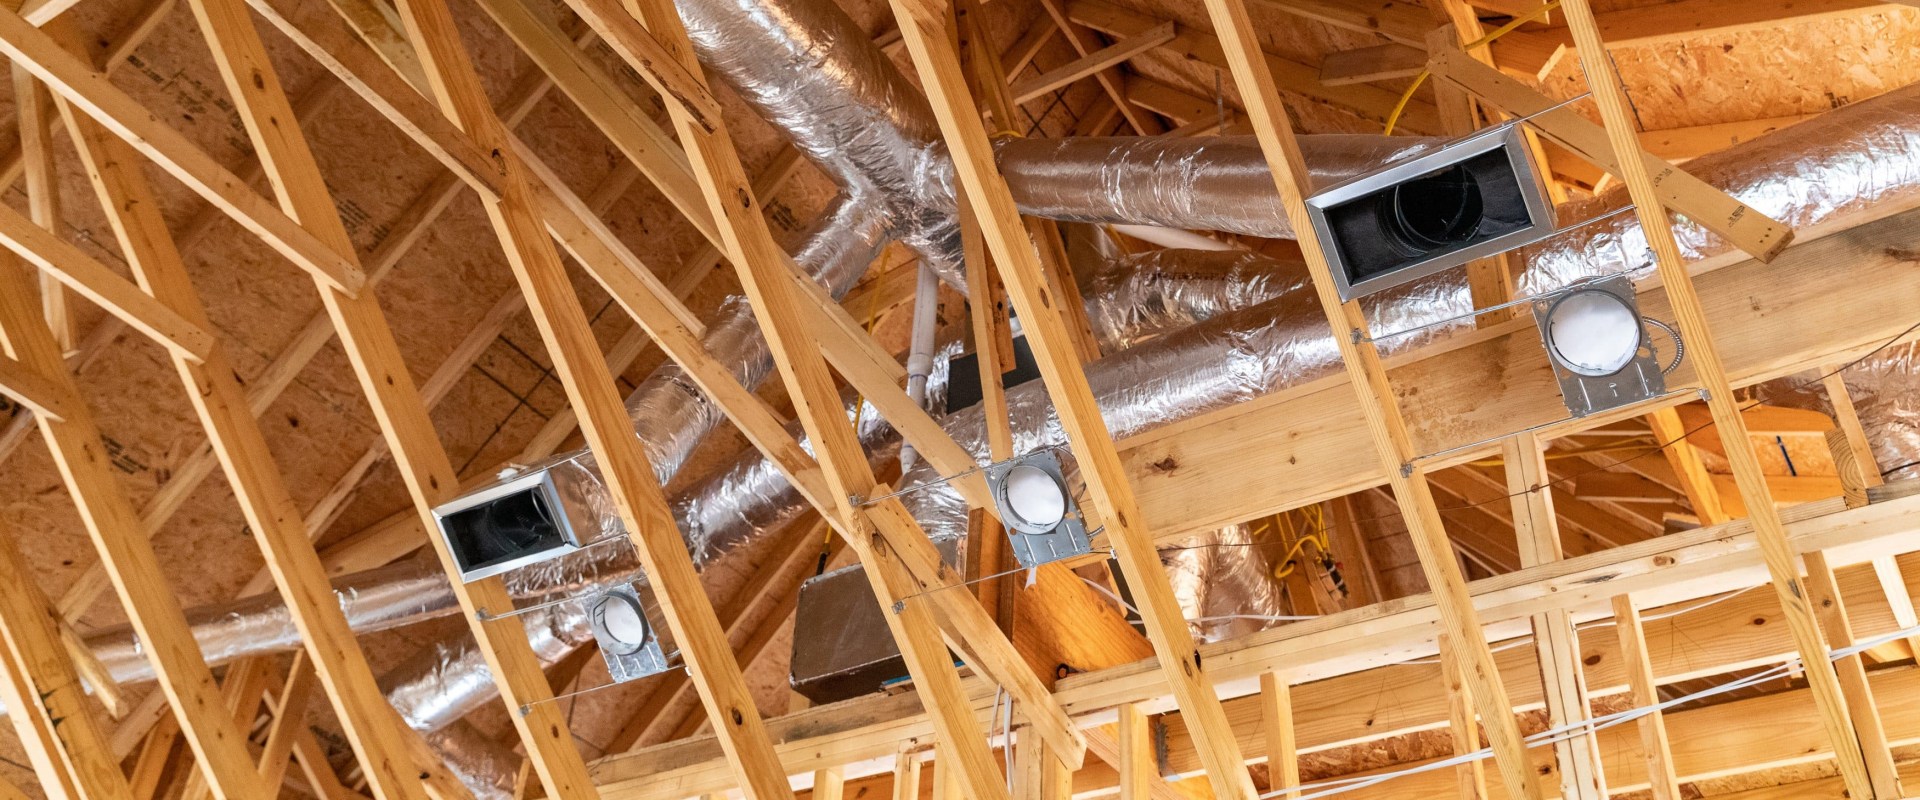 10 Signs That Indicate You Need to Replace Your Duct System - From an Expert's Perspective